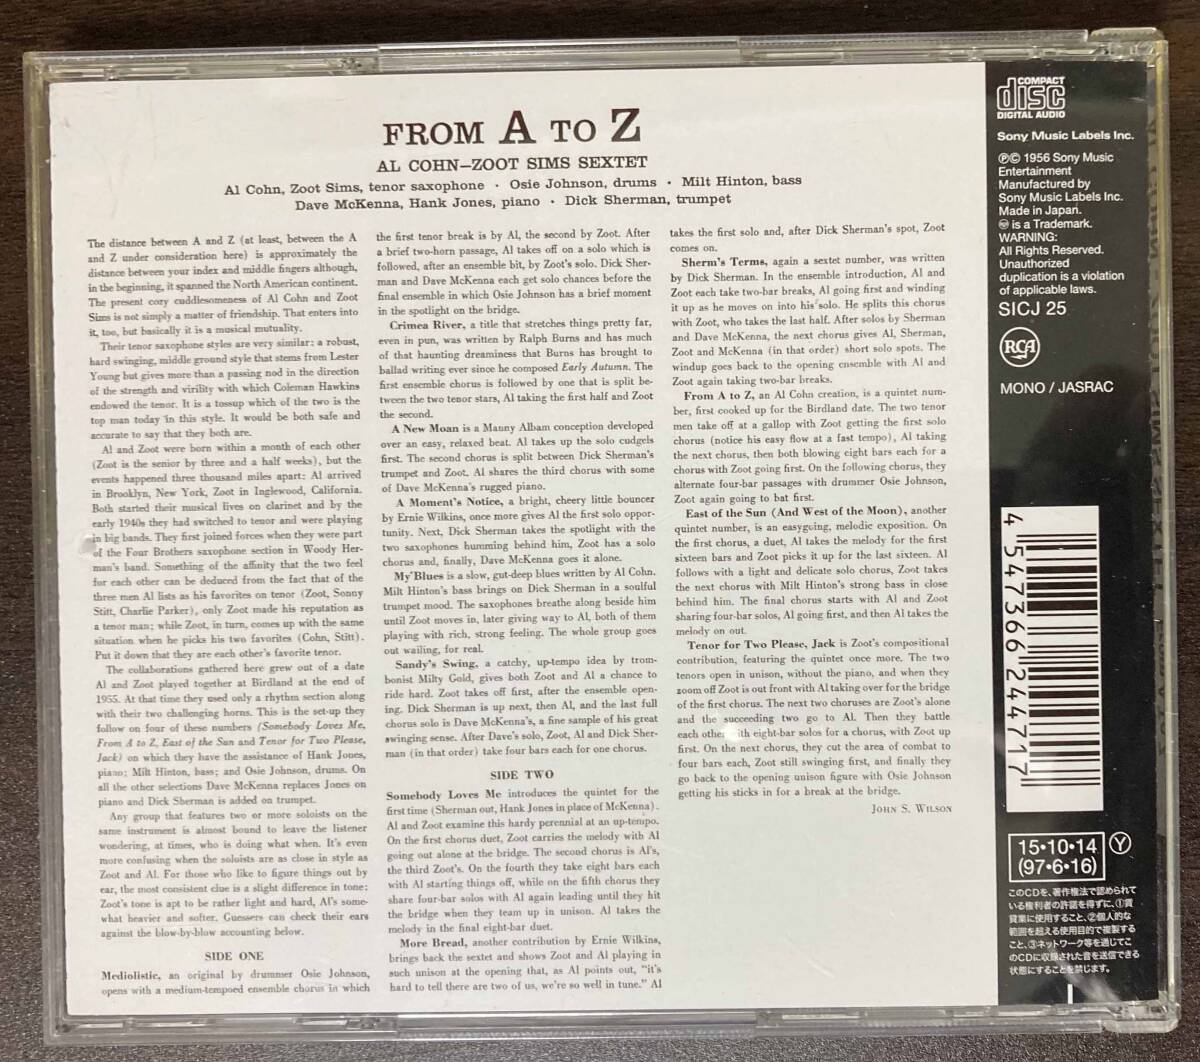 Al Cohn & Zoot Sims Sextet / From A to Z 中古CD 国内盤 帯付き 期間限定生産盤 2003年リマスターの画像3